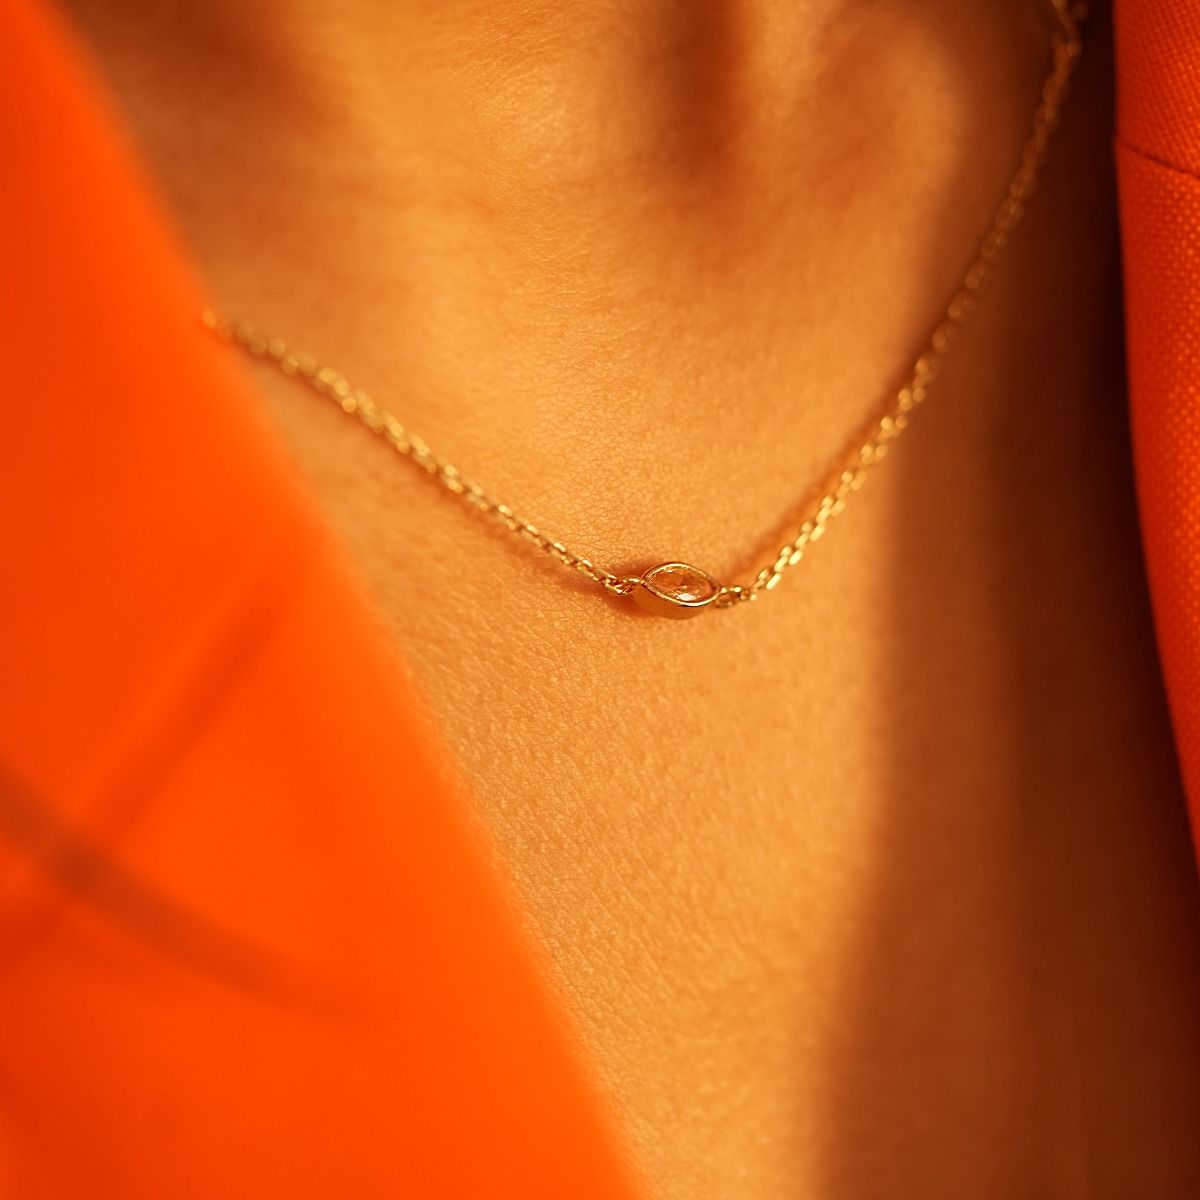 The Marquise Crystal Dainty Necklace showcases an elegant arrangement with three cubic zirconia marquise stones on both sides and at the centre of the chain. Its lightweight and adjustable chain guarantees a comfortable fit, while the strategically placed